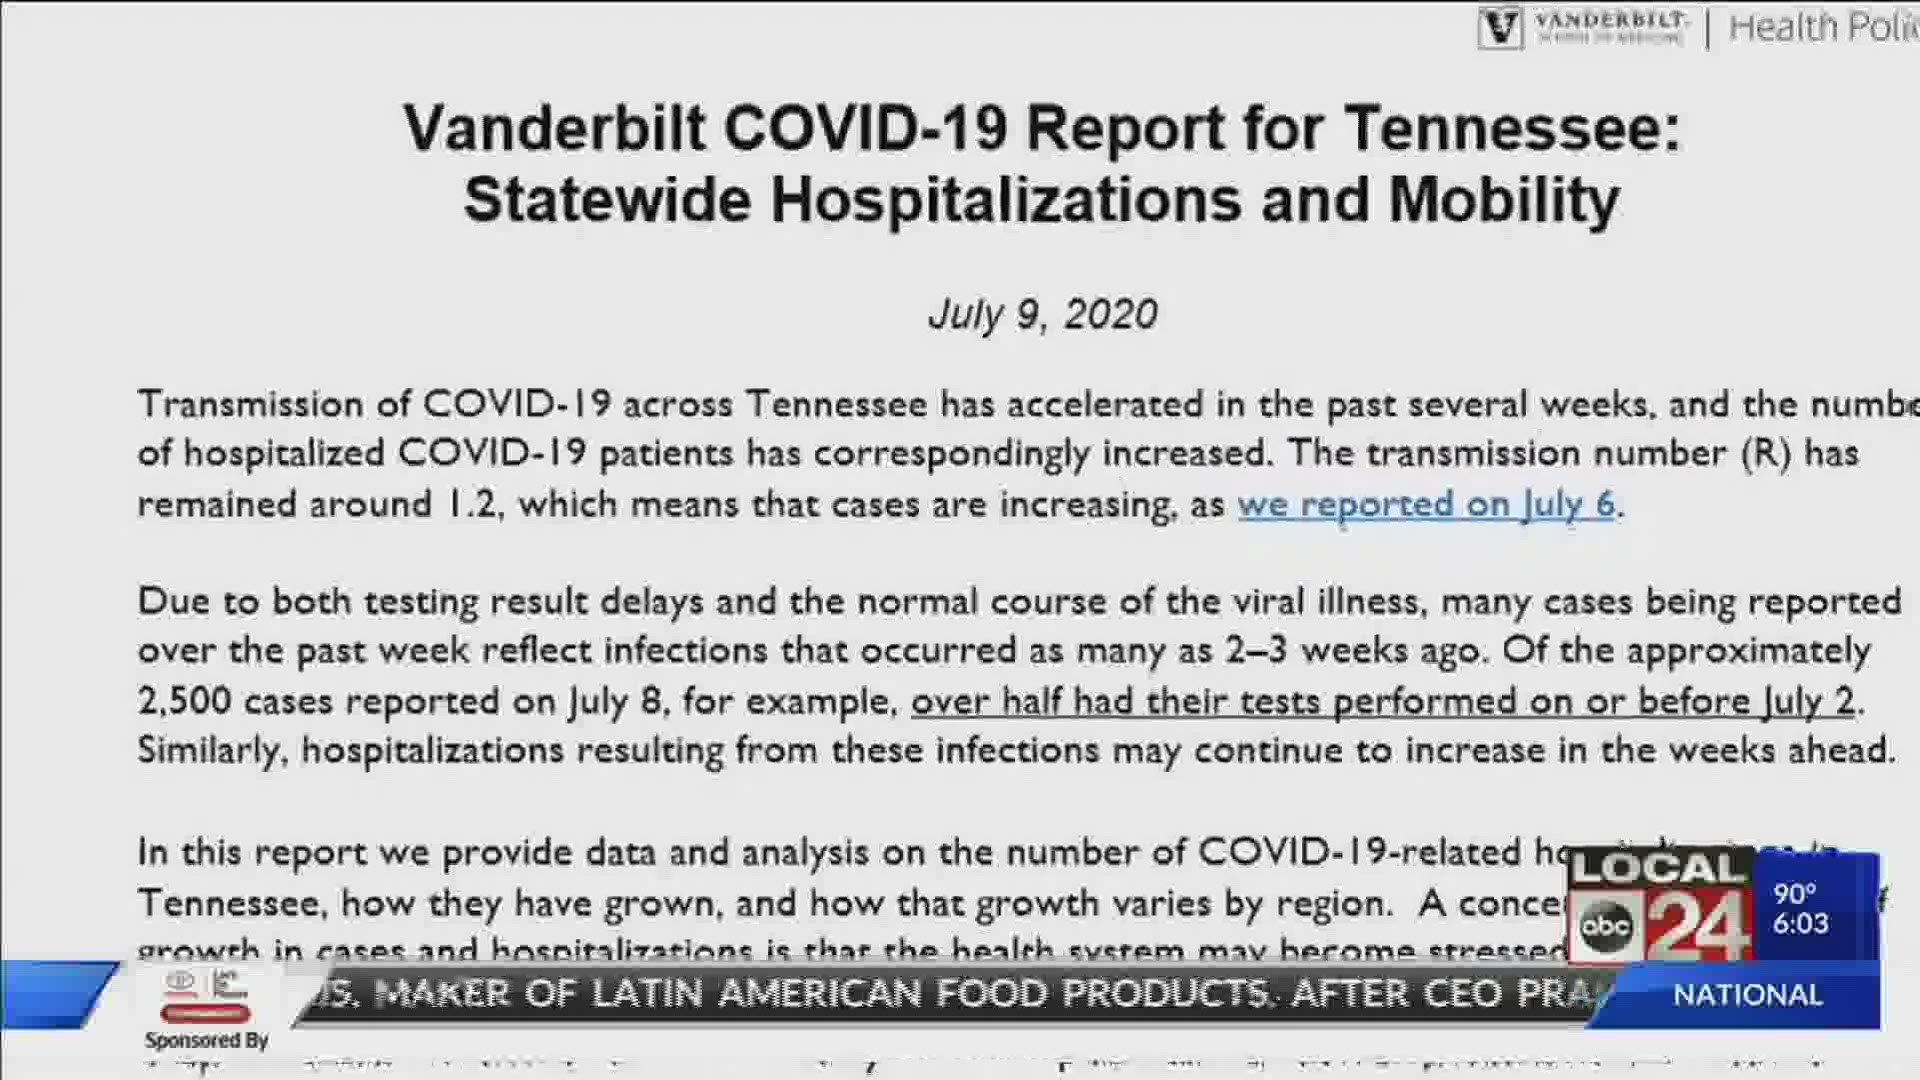 New Vanderbilt data shows largest weekly hospitalization increase; health experts concerned about available beds in coming weeks.